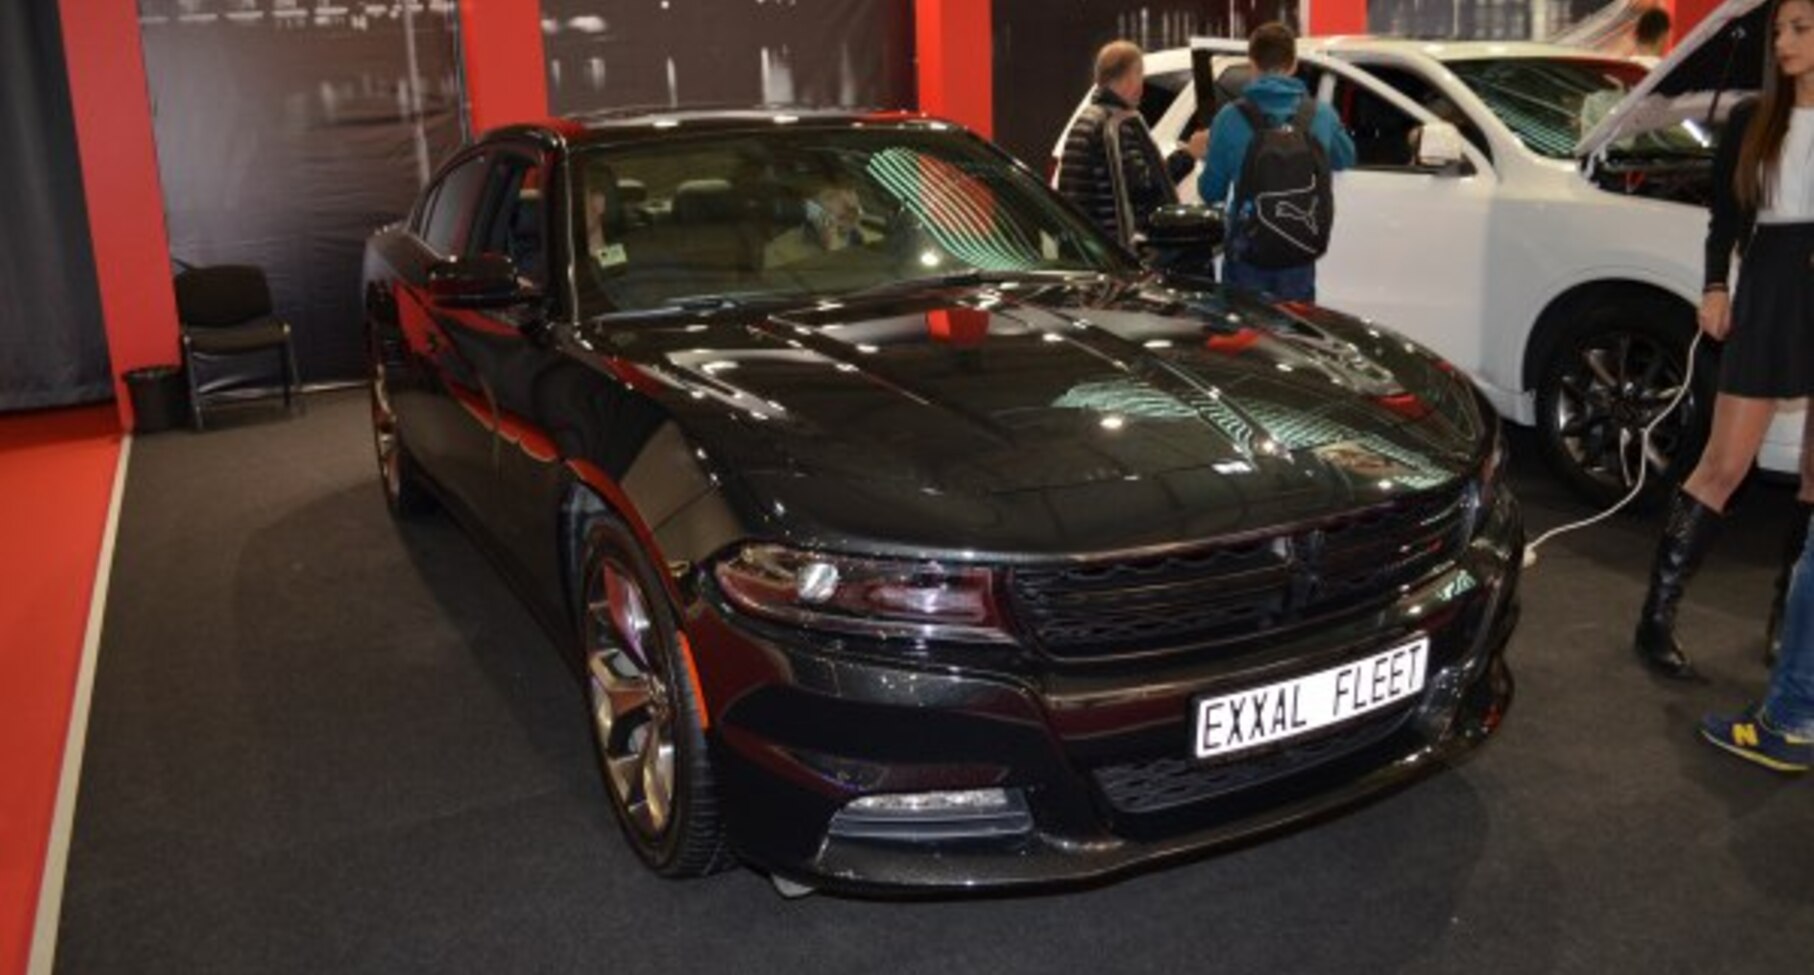 Dodge Charger VII (LD; facelift 2015) R/T Scat Pack 6.4 HEMI V8 (485 Hp) Automatic 2015, 2016, 2017, 2018 